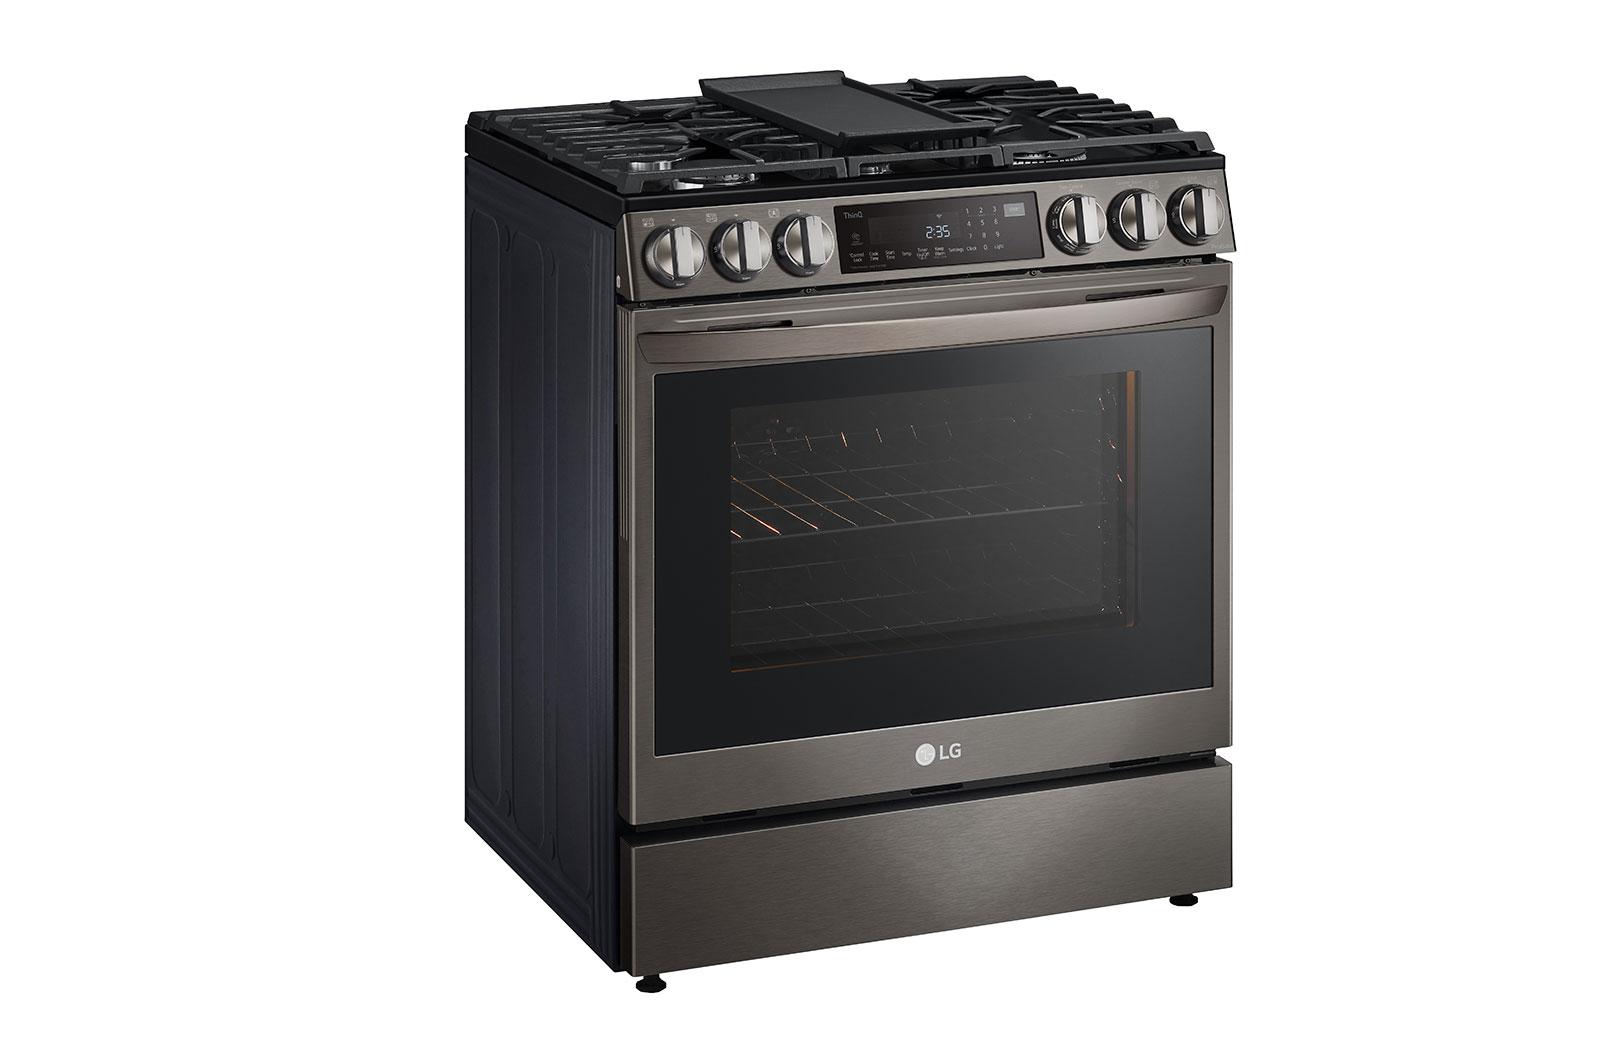 Lg 6.3 cu. ft. Smart wi-fi Enabled ProBake® Convection InstaView® Dual Fuel Slide-In Range with Air Fry